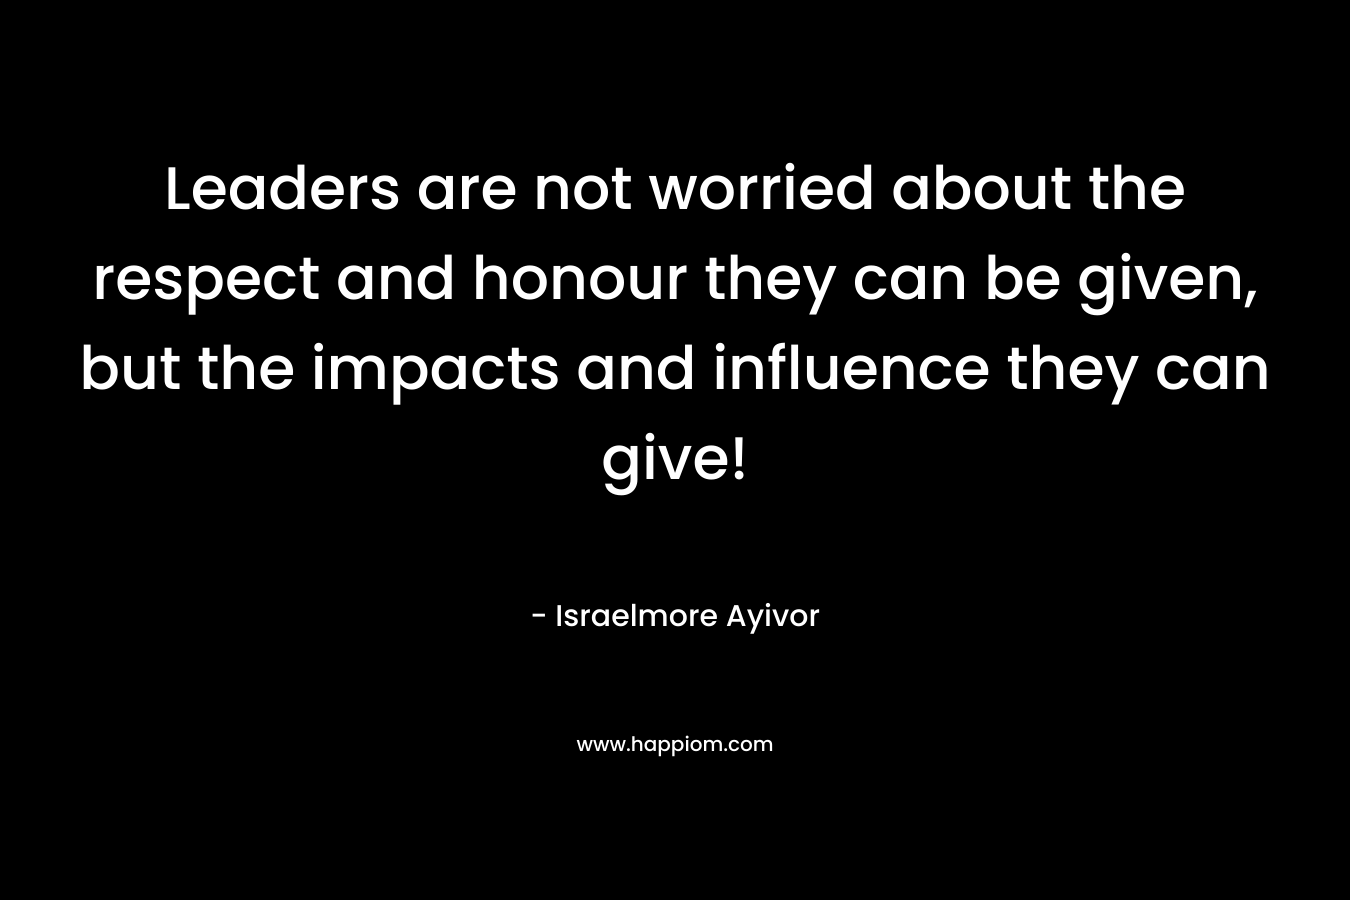 Leaders are not worried about the respect and honour they can be given, but the impacts and influence they can give! – Israelmore Ayivor